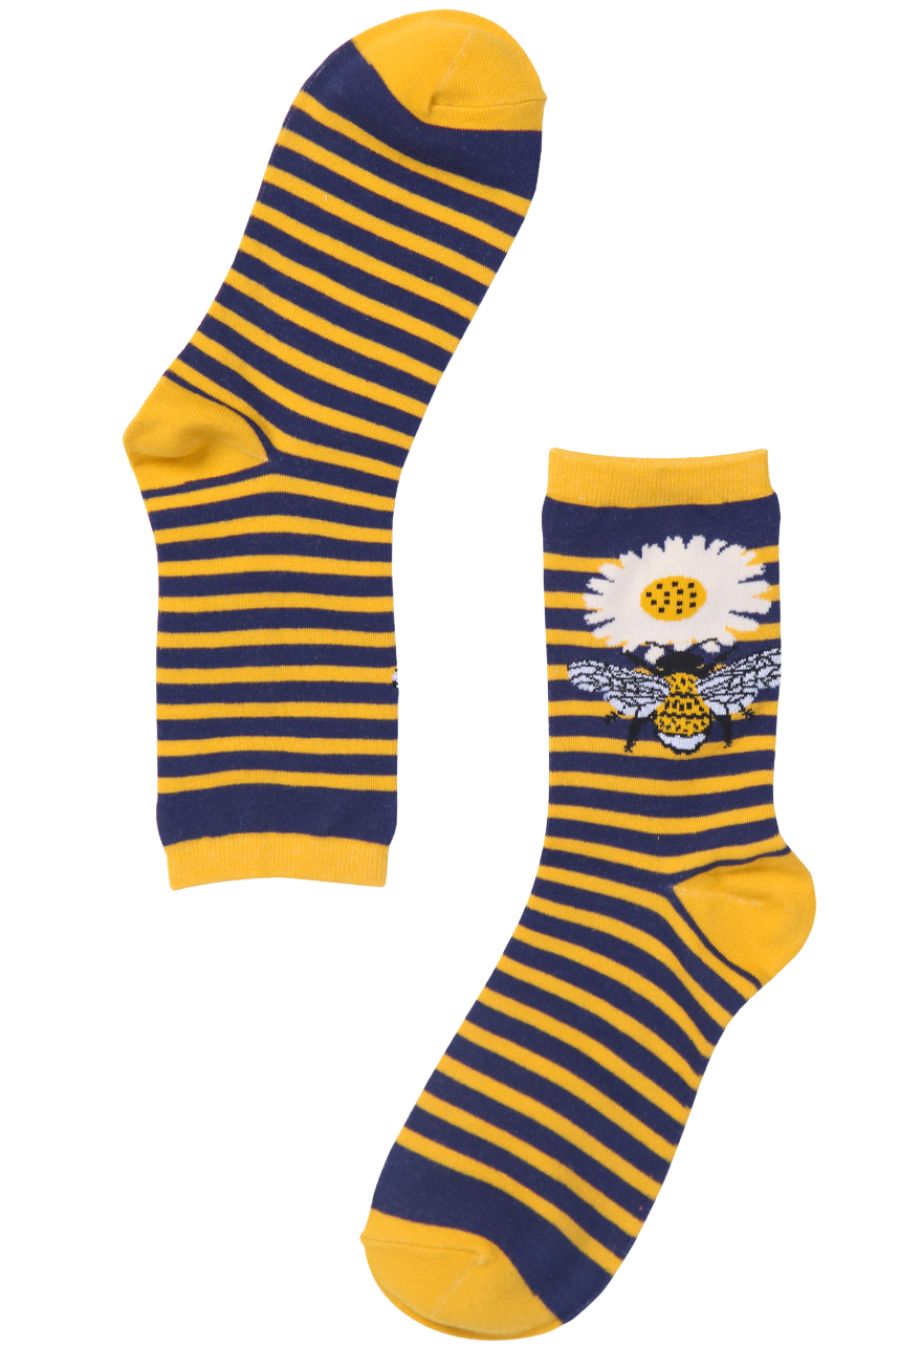 yellow and navy striped ankle socks with bumblebee and daisy